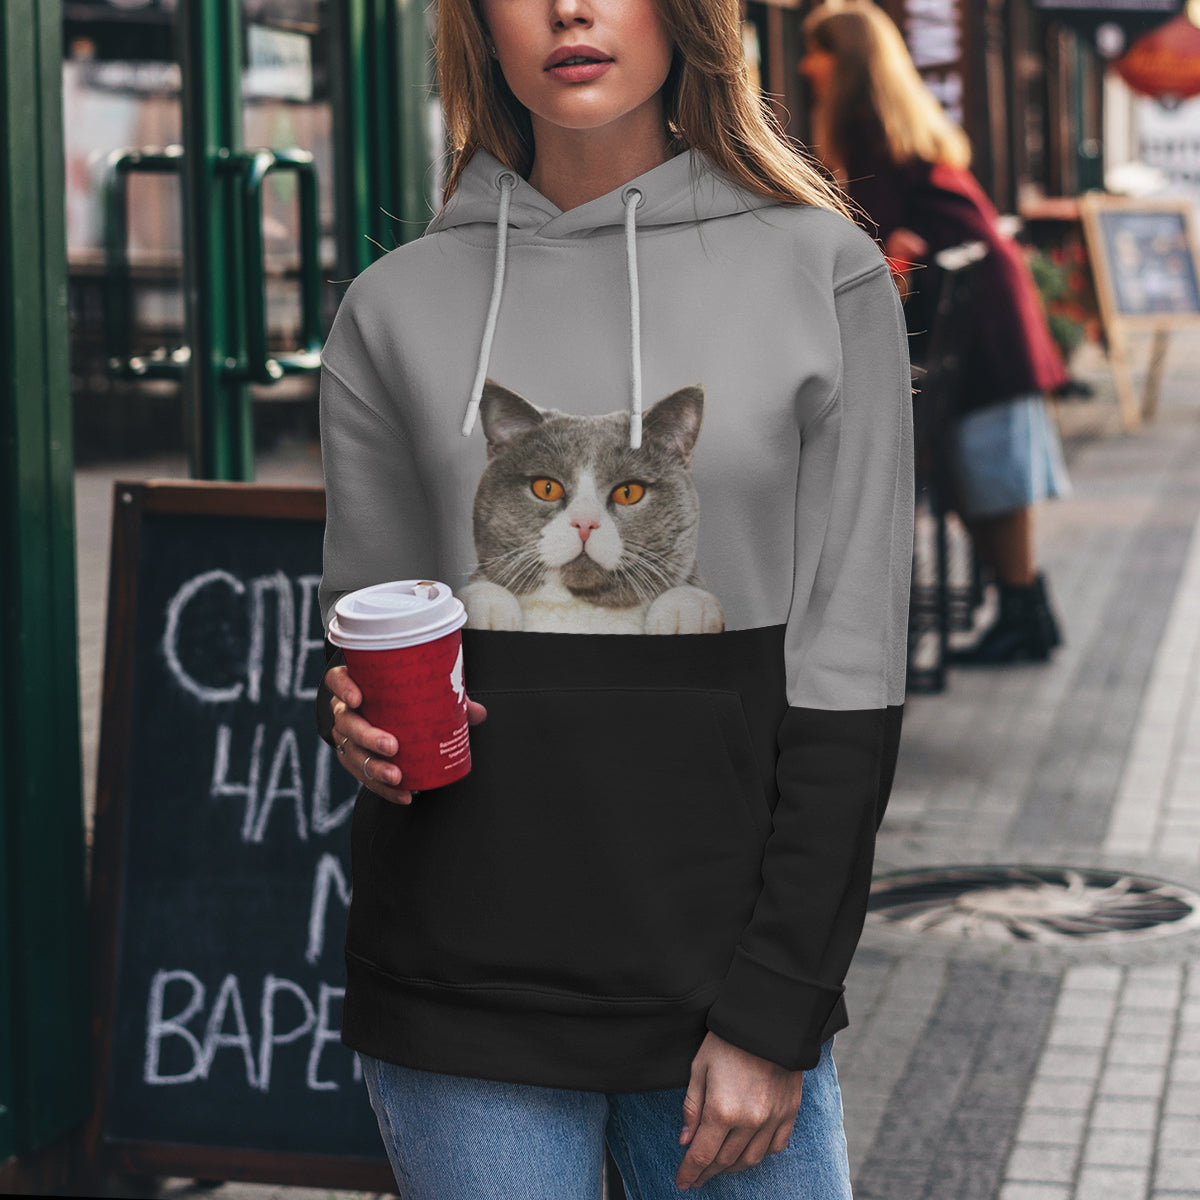 Can You See Me - British Shorthair Cat Hoodie V2